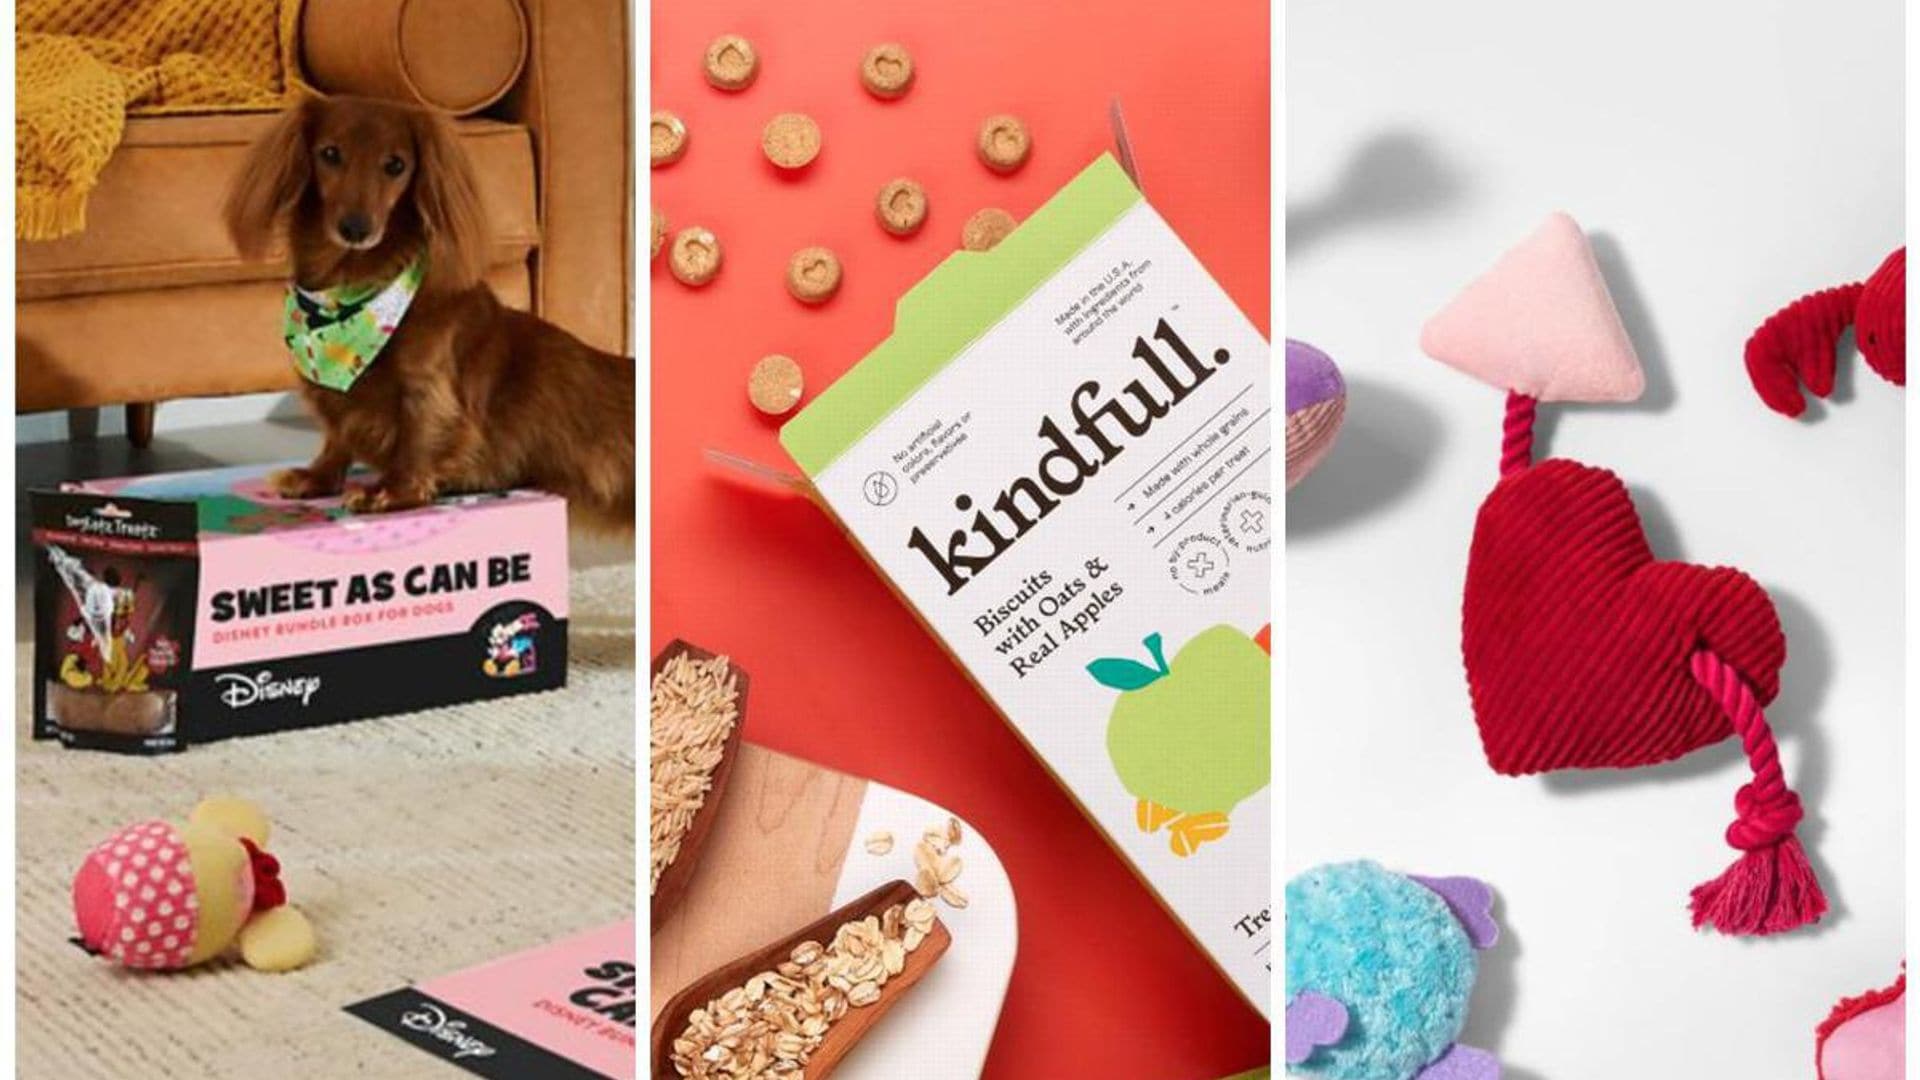 Spoil your furry friend this Valentine's Day with the healthiest treats, entertaining toys, and best grooming products